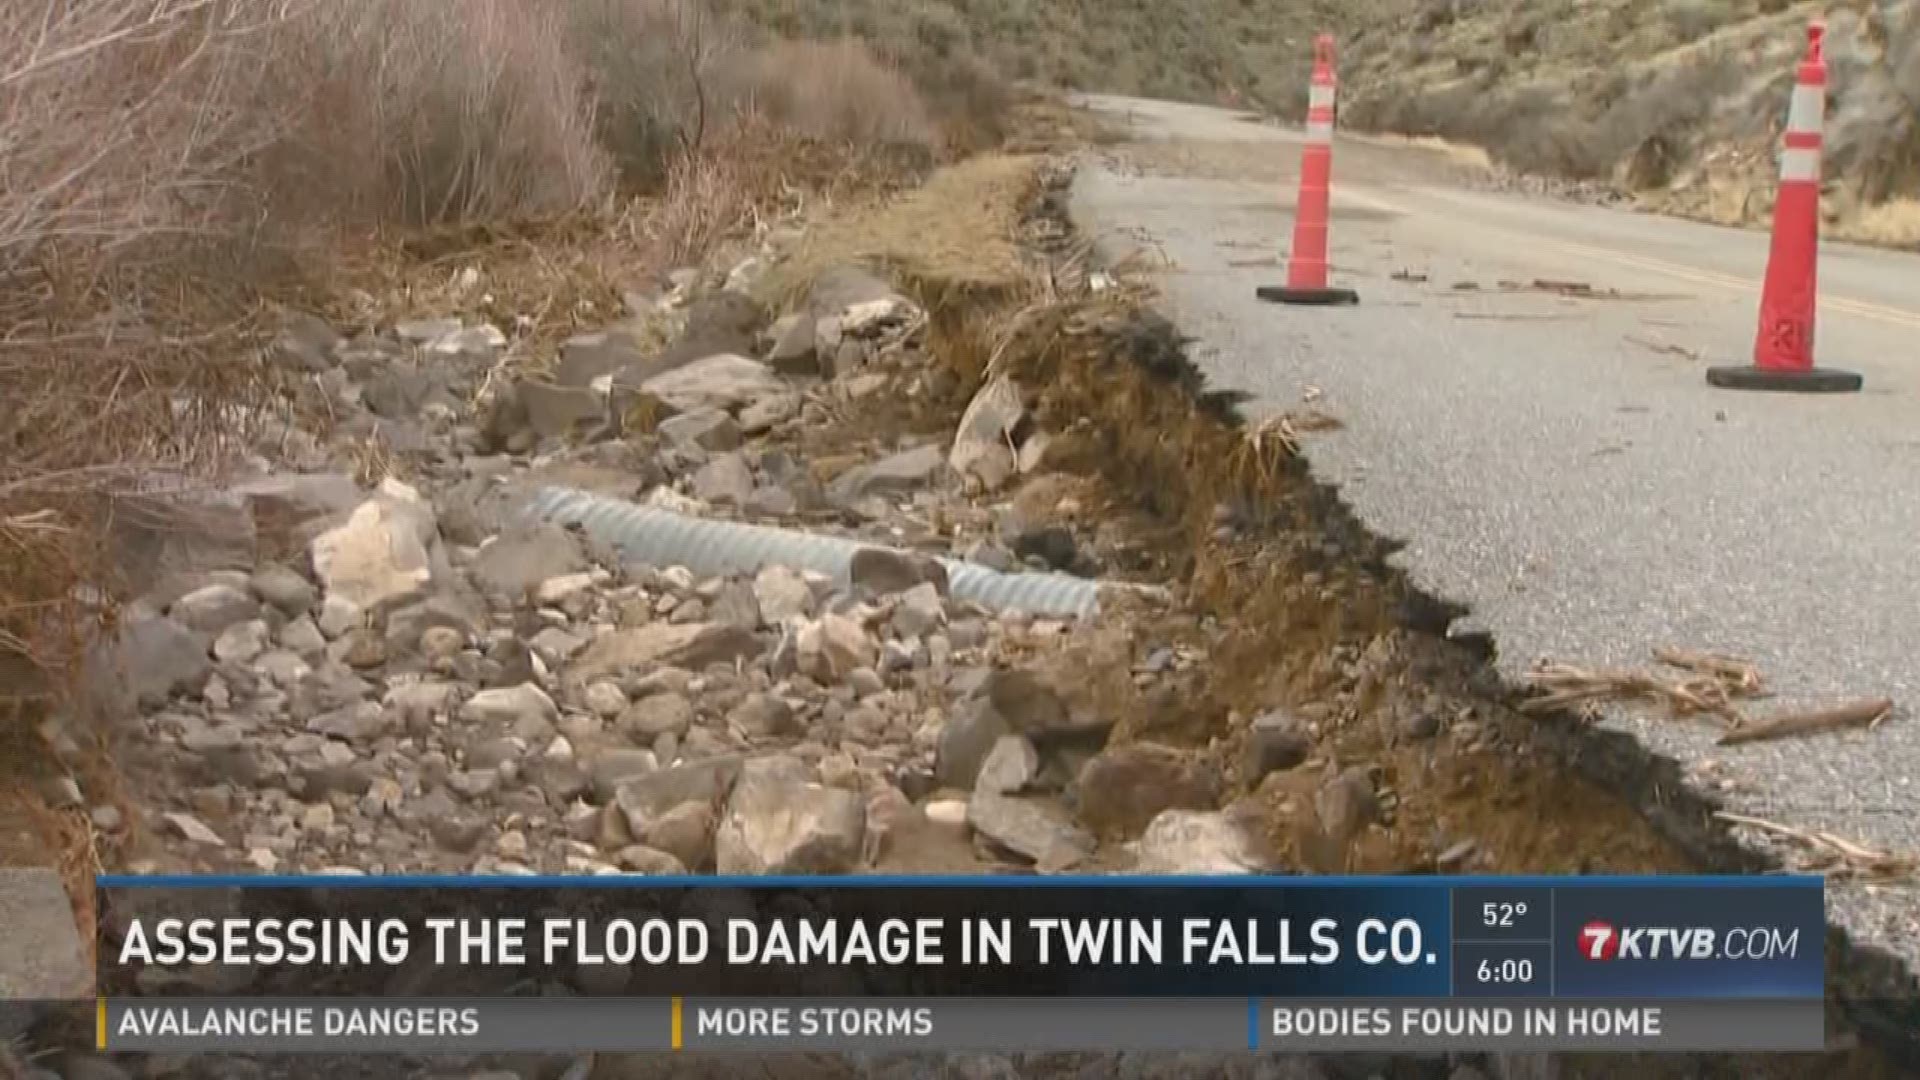 A lot of roads in the area are closed due to flood damage.